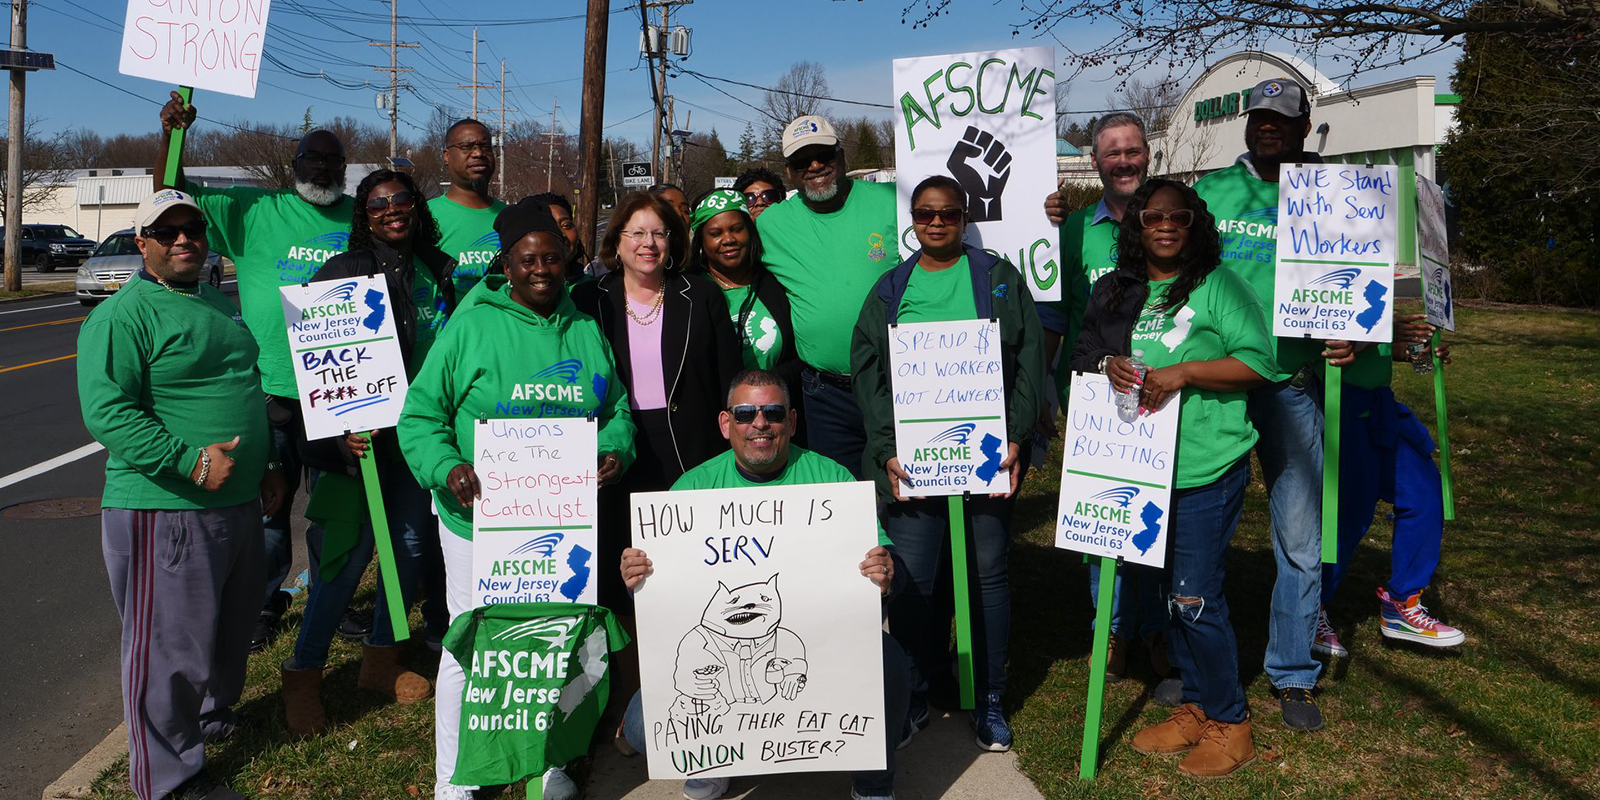 NJ Behavioral Health Workers Make Voices Heard In Seeking Union Recognition